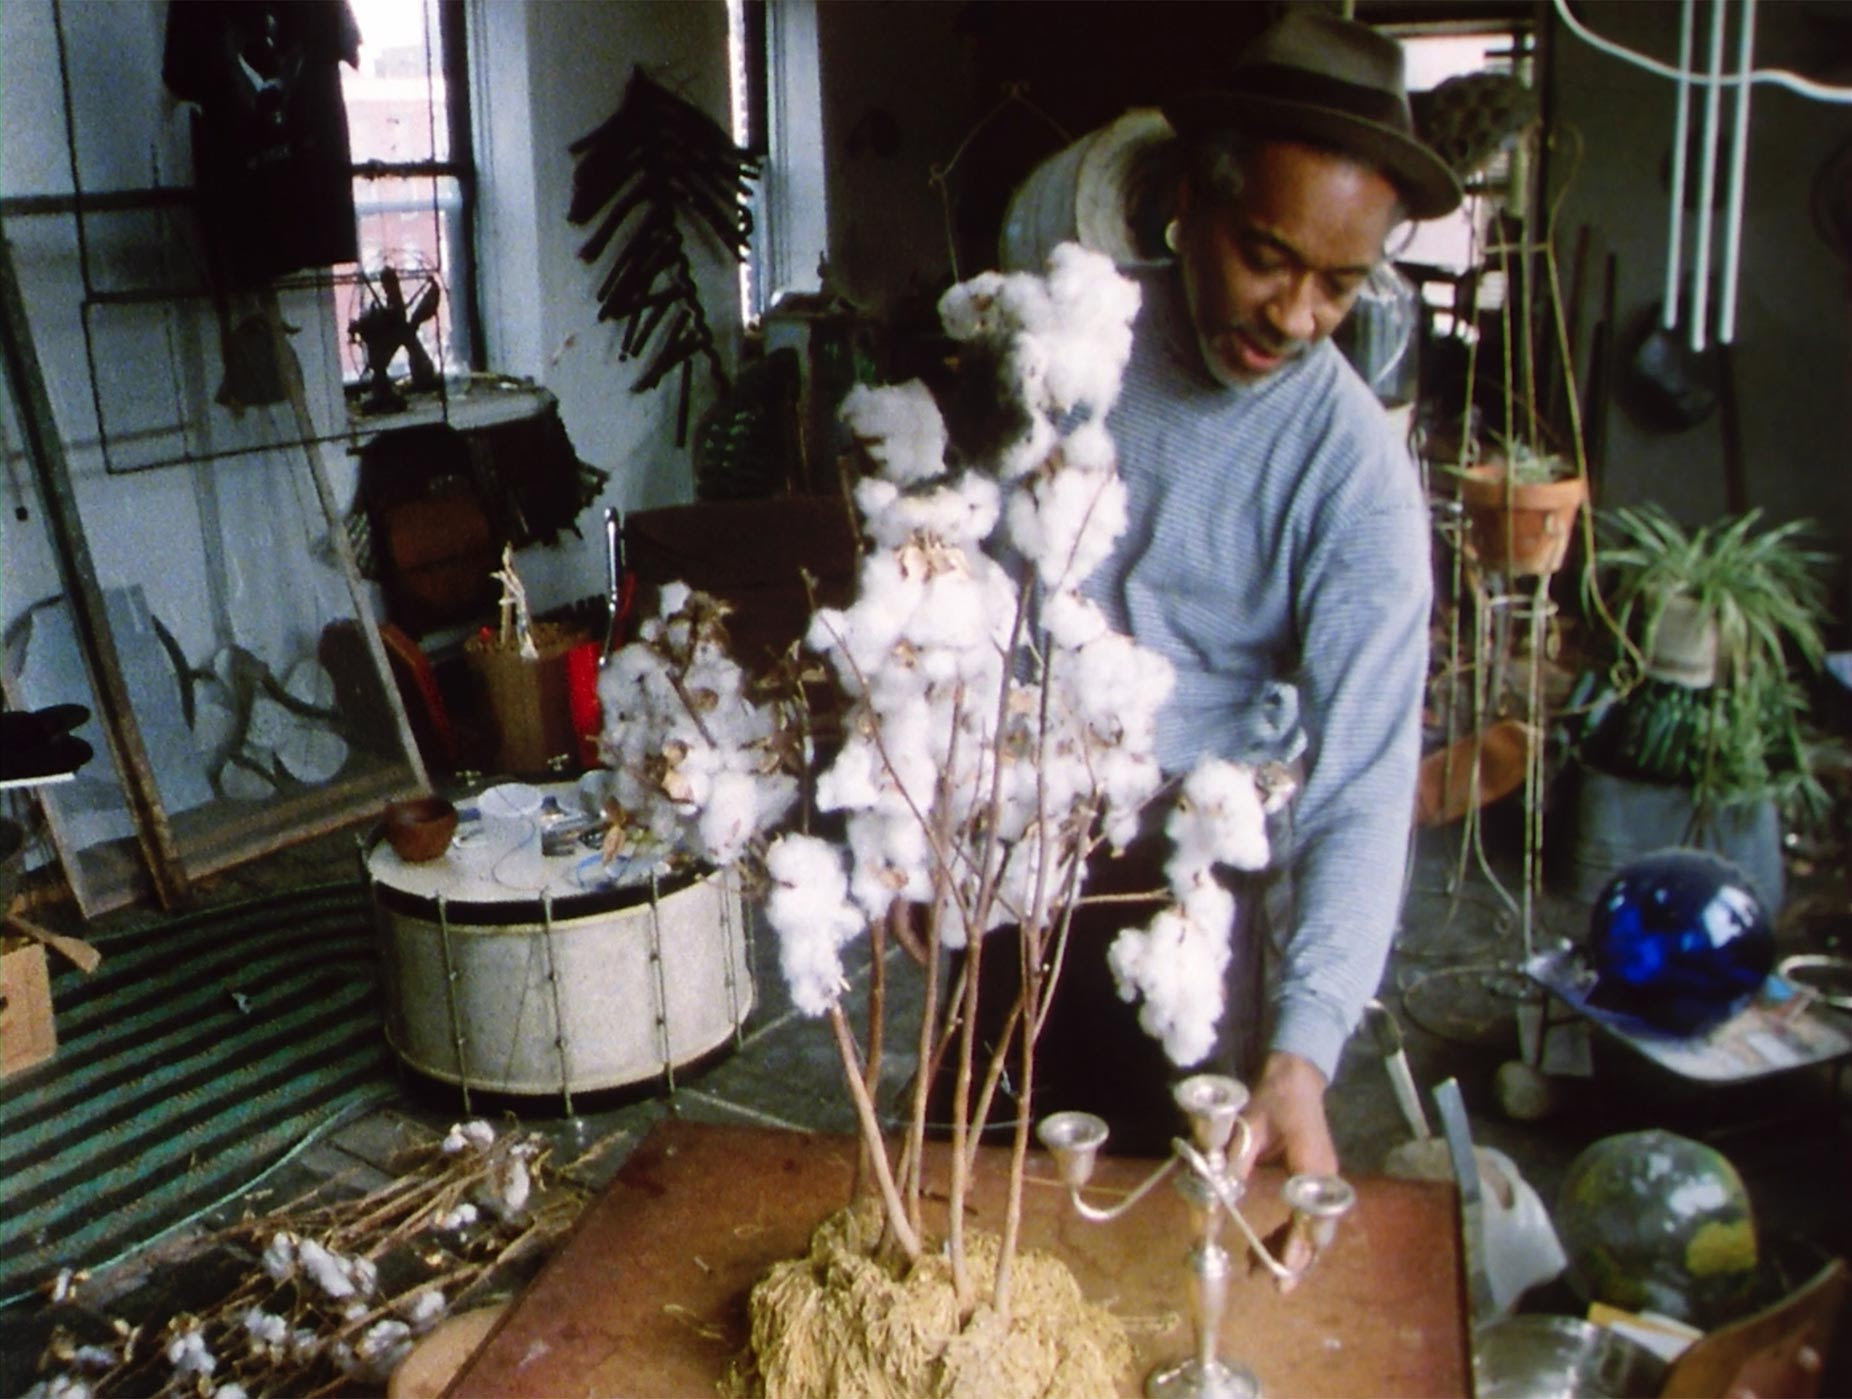 Hammons in his Harlem studio in the 1980s. Image courtesy of Micheal Blackwood.